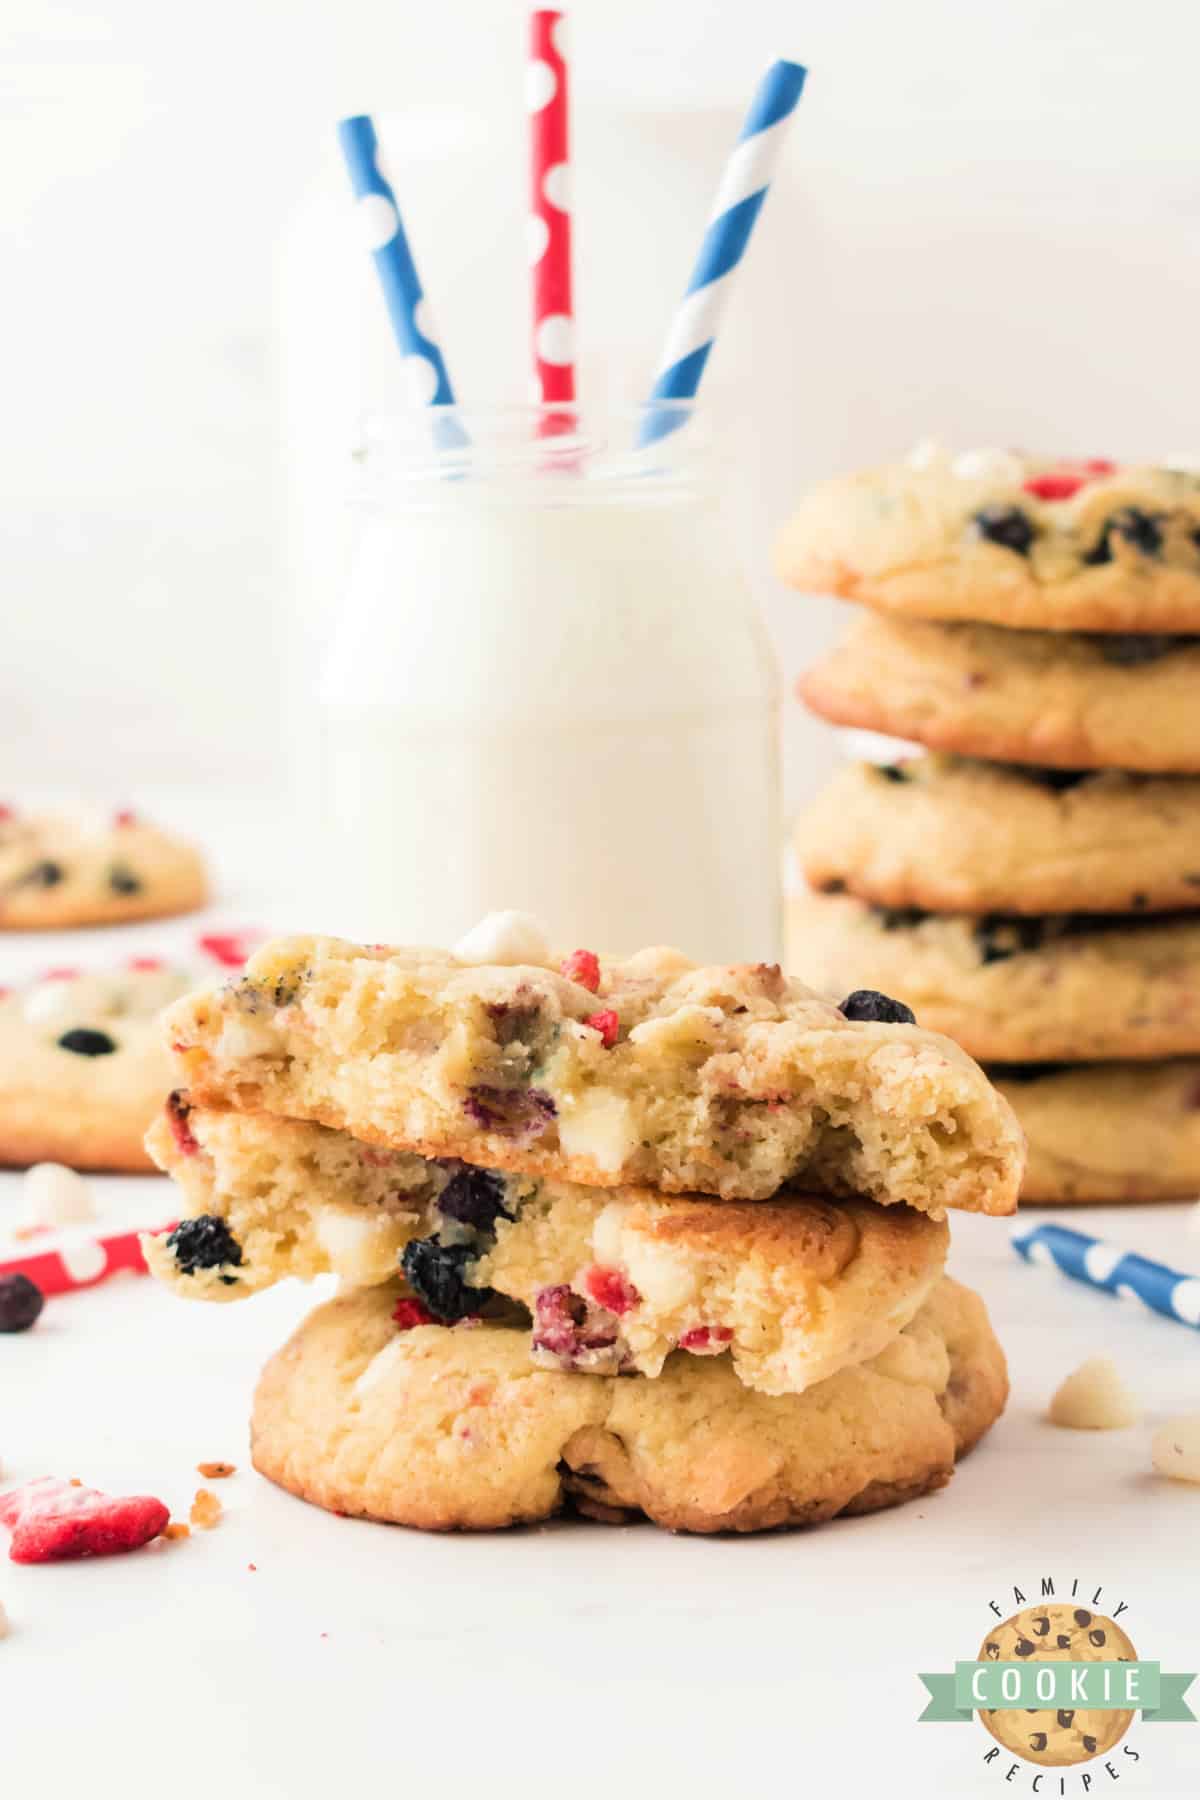 Cookies with freeze-dried blueberries and strawberries. 